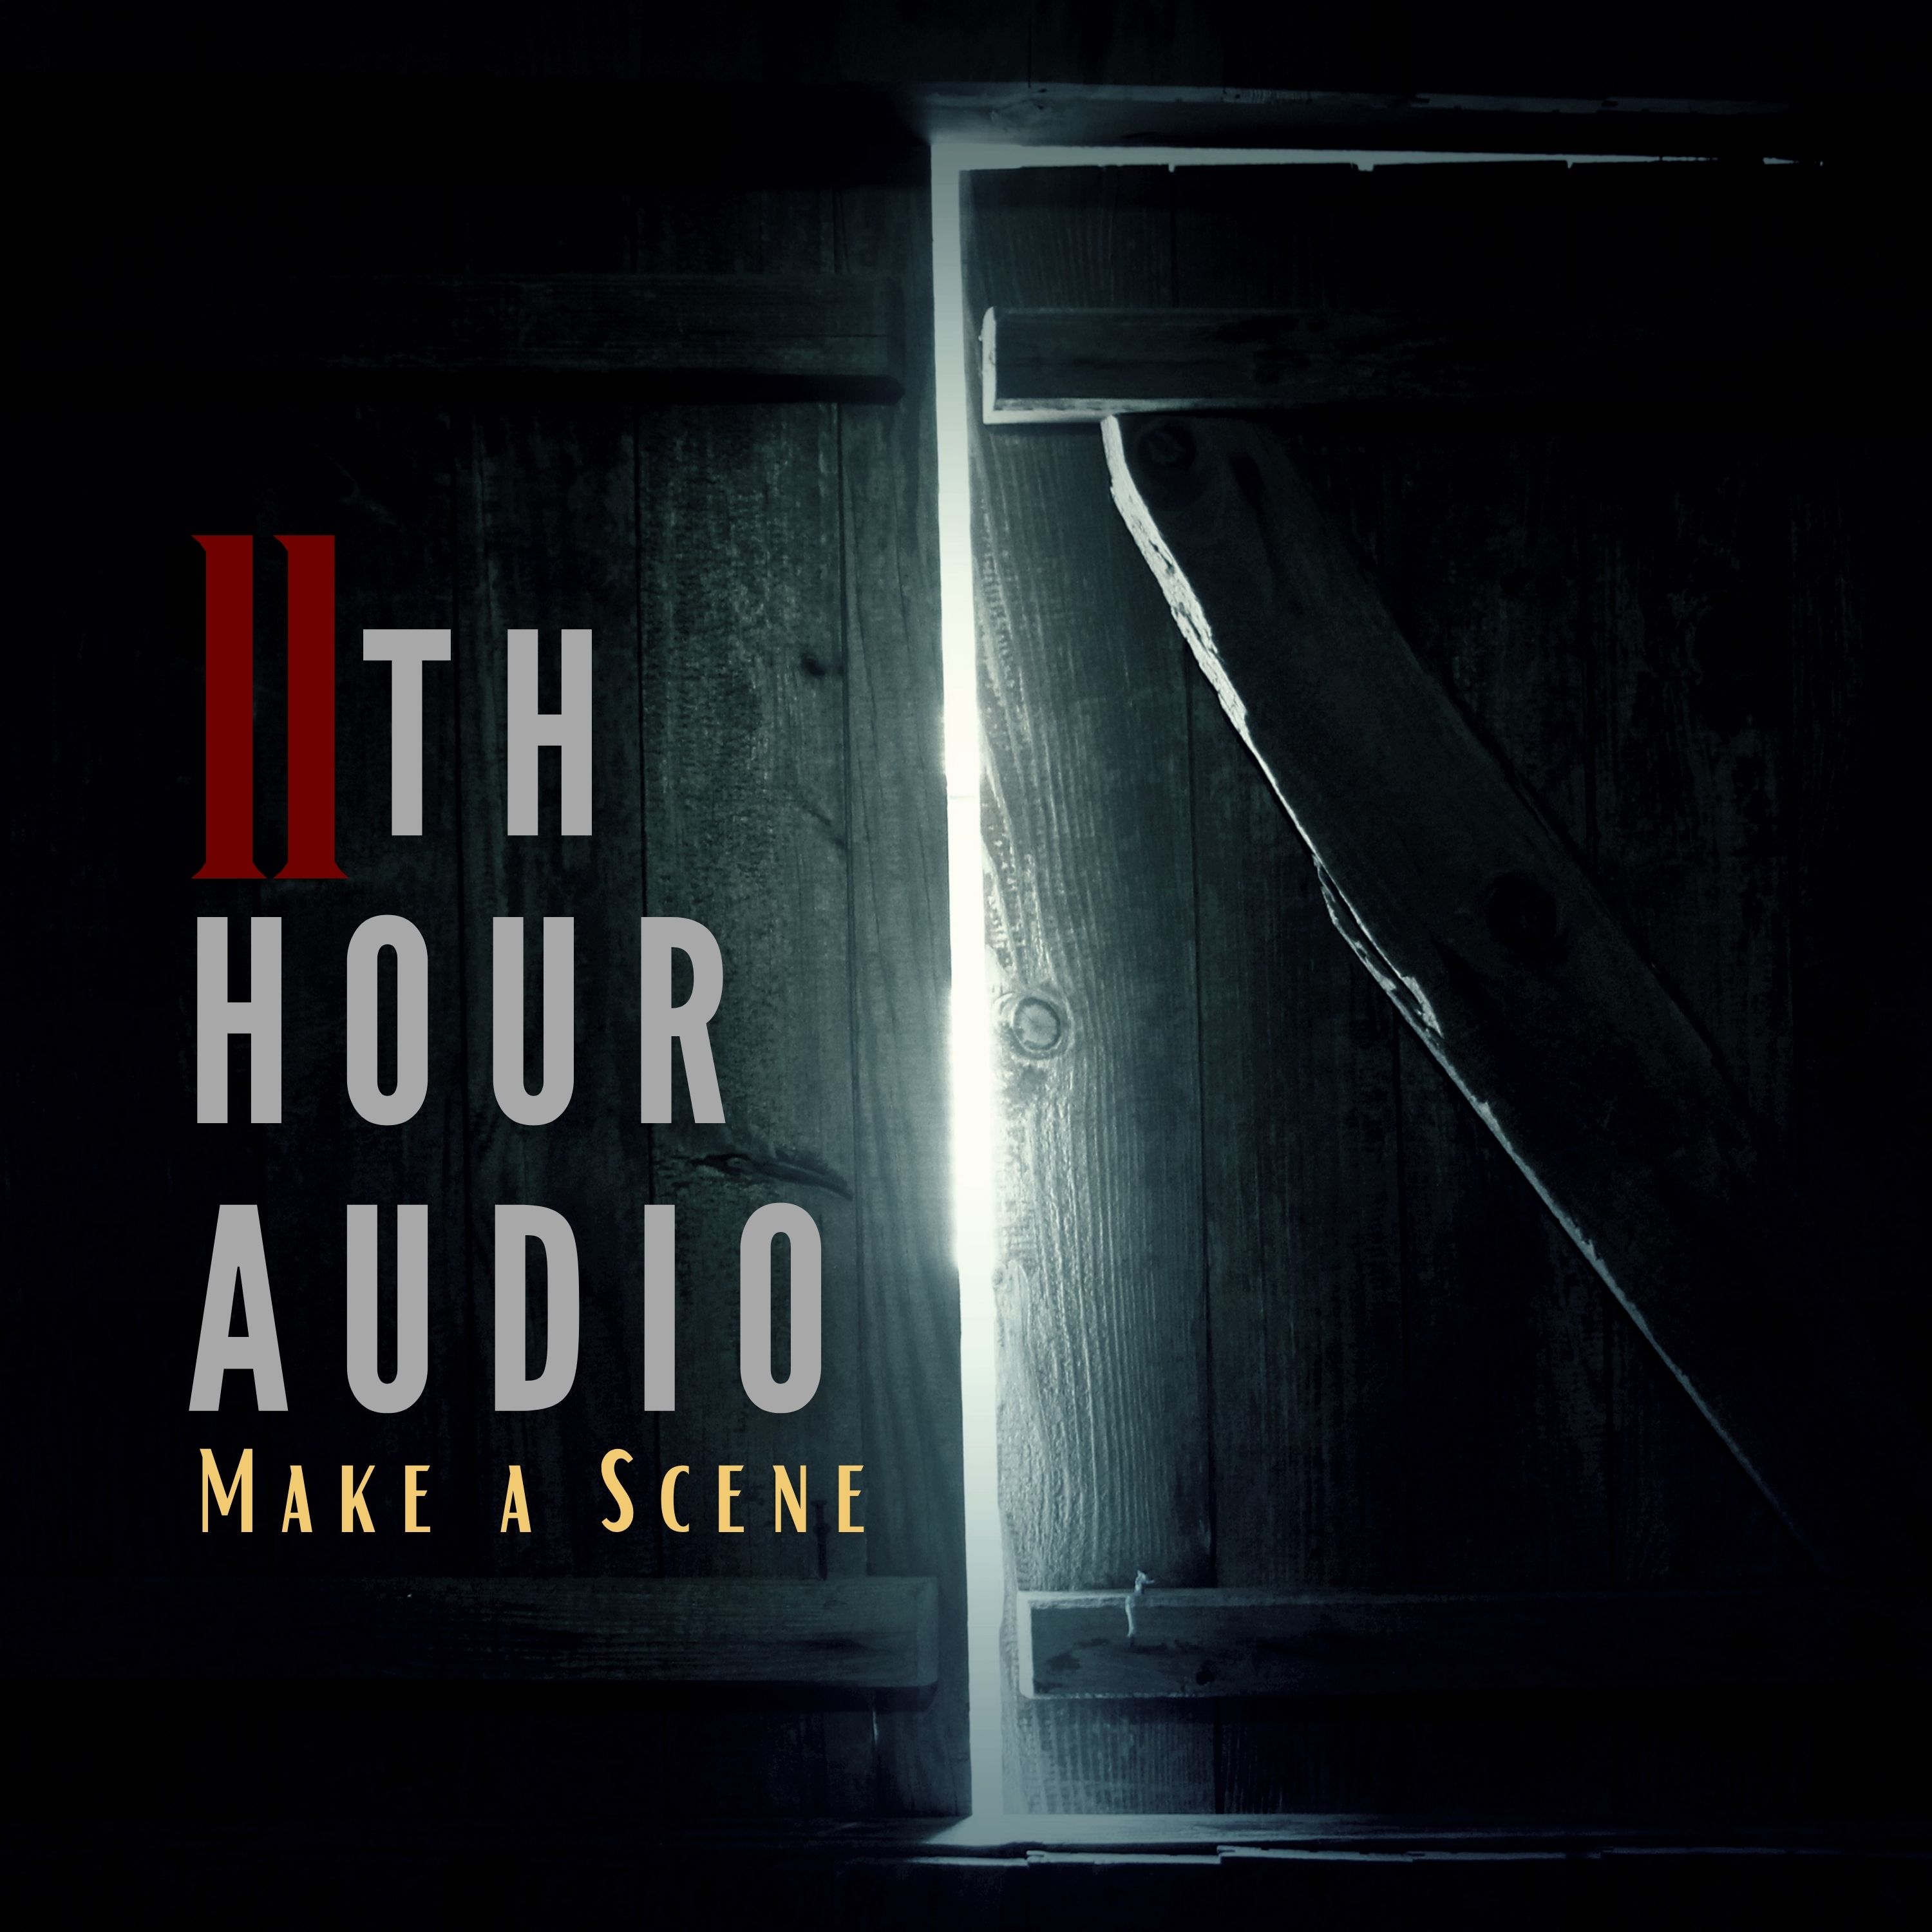 A call to horror producers!